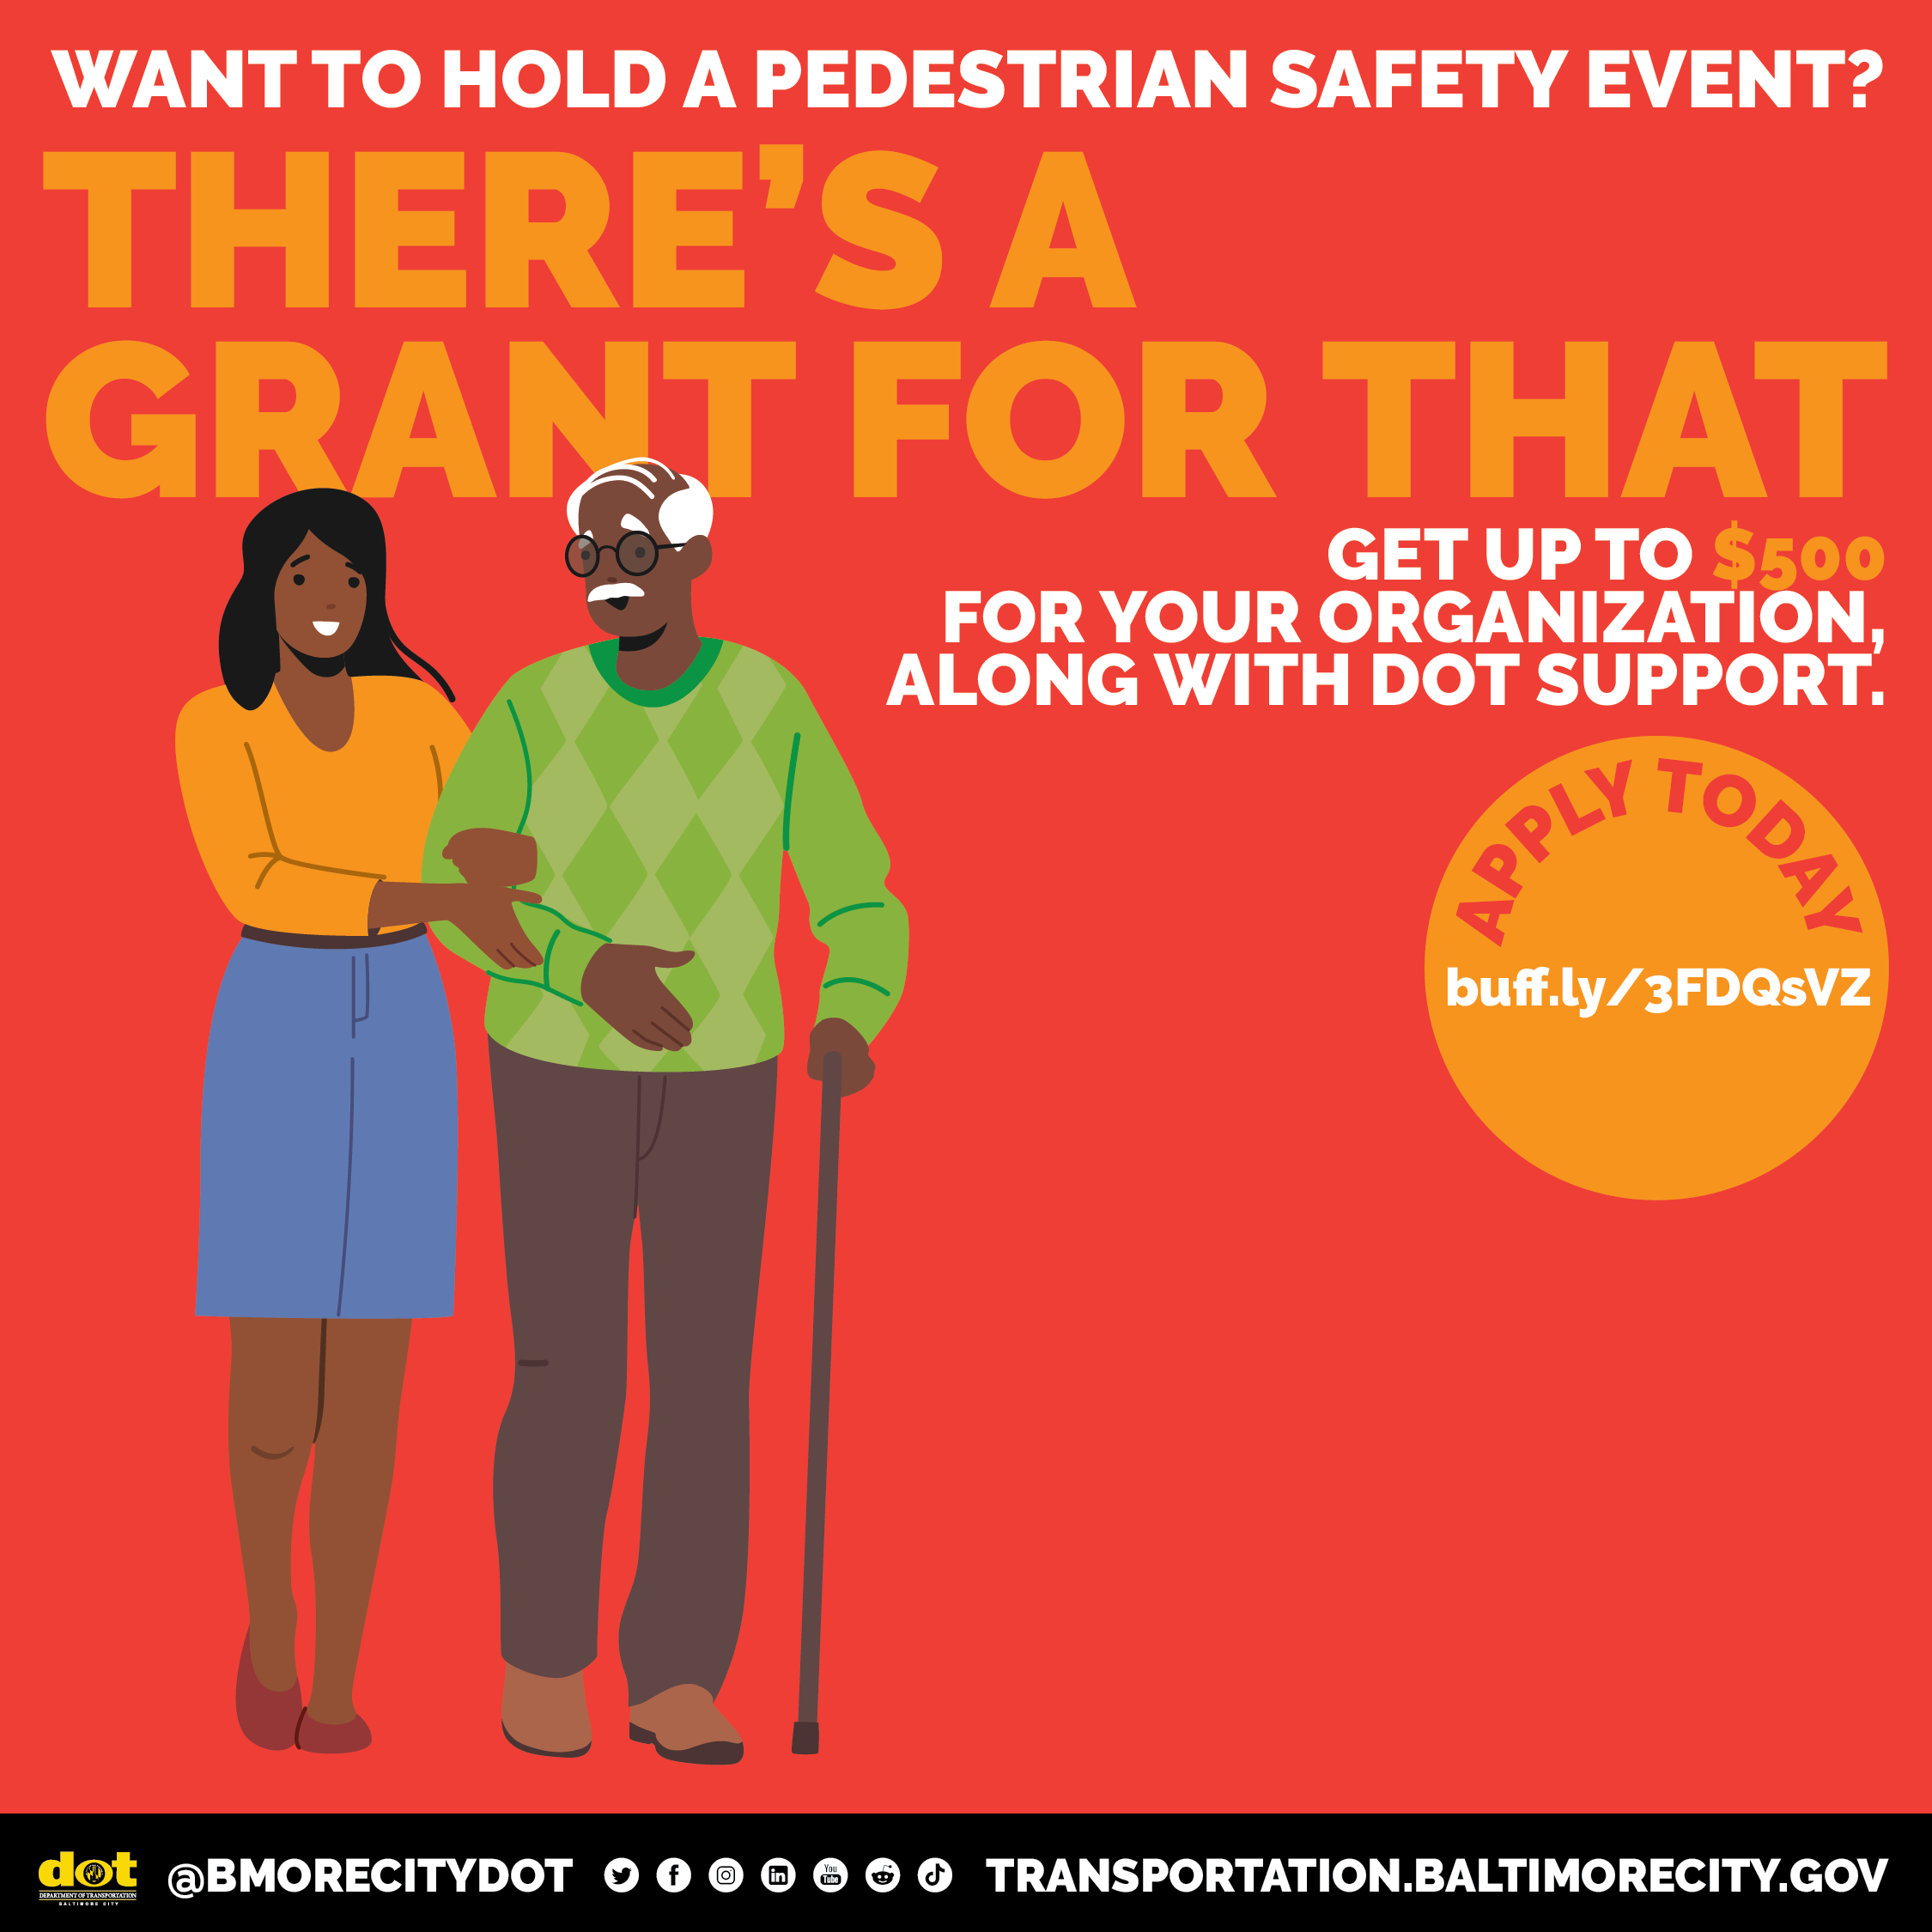 Want to hold a pedestrian safety event? There's a grant for that!